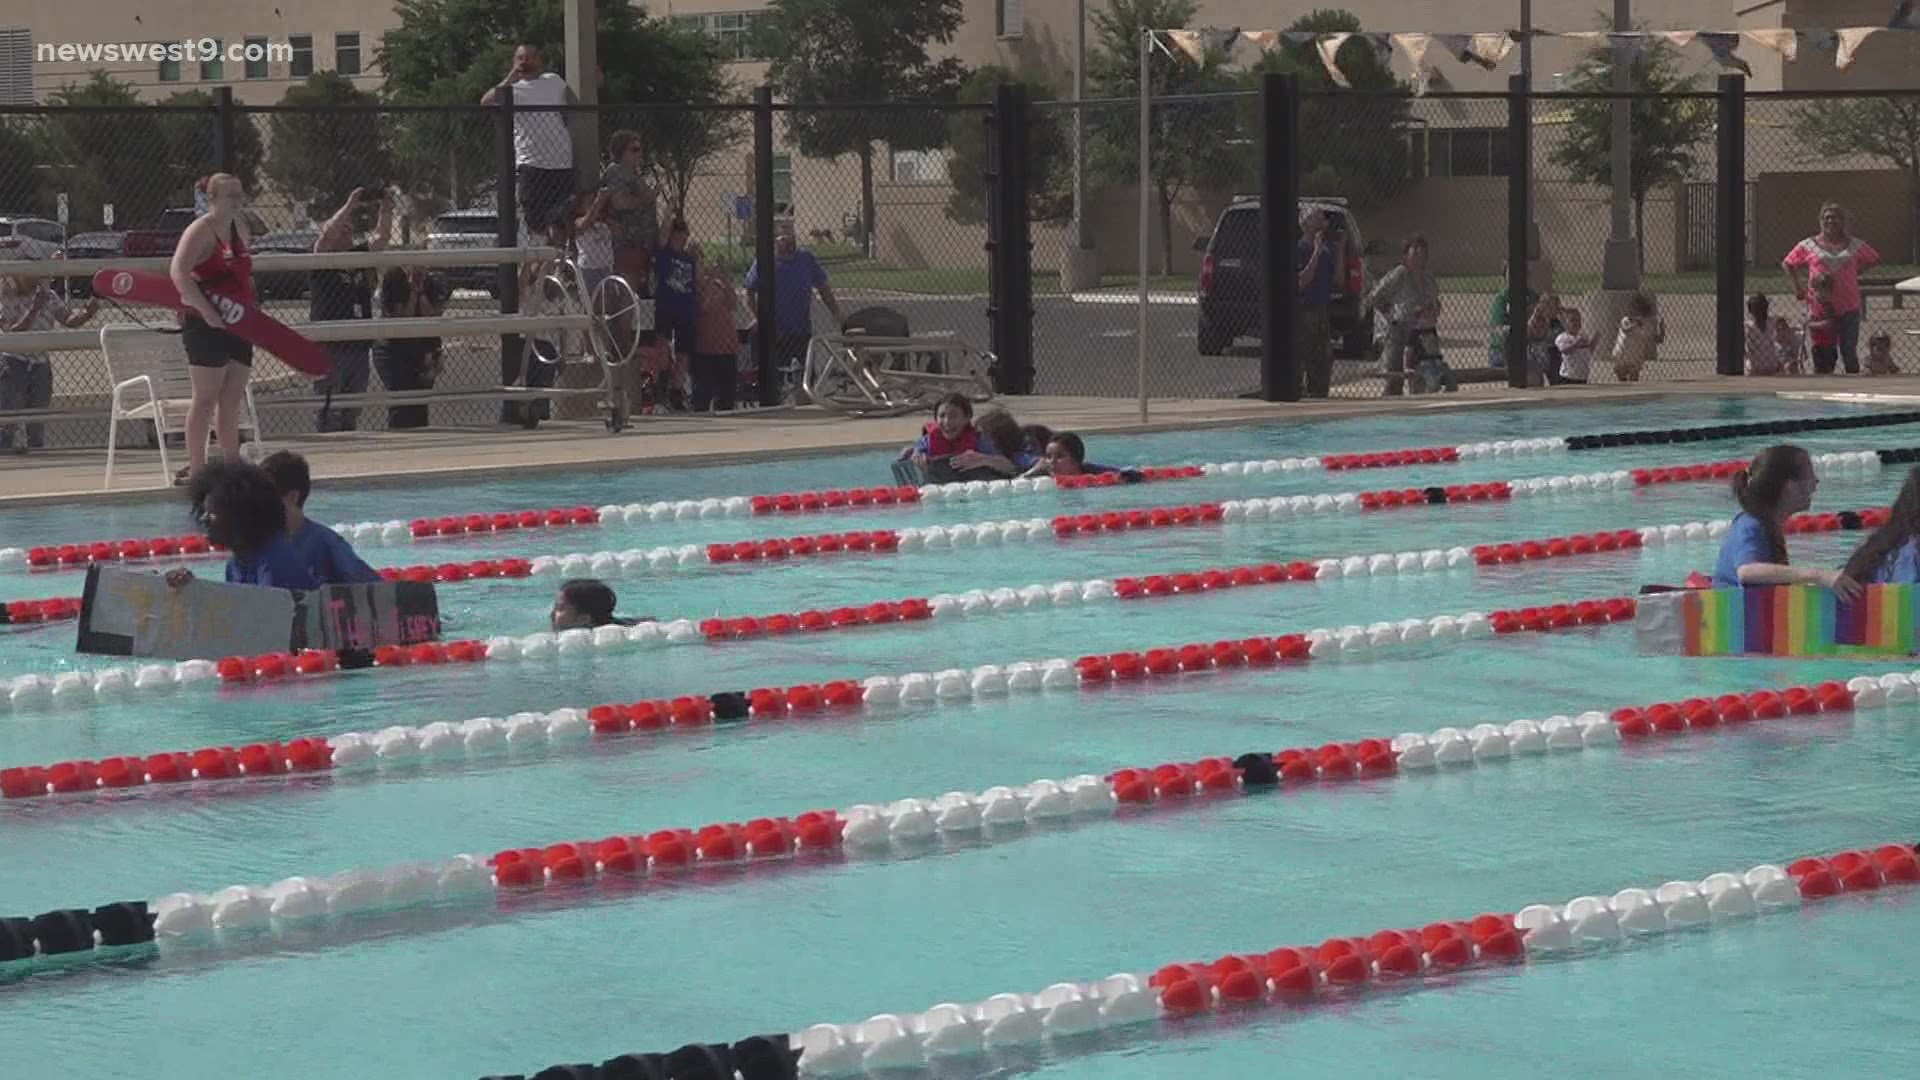 UTPB is hosting boat races for the students at the UTPB Stem Academy. Students are given a couple days to construct boats made out of duct tape and cardboard.